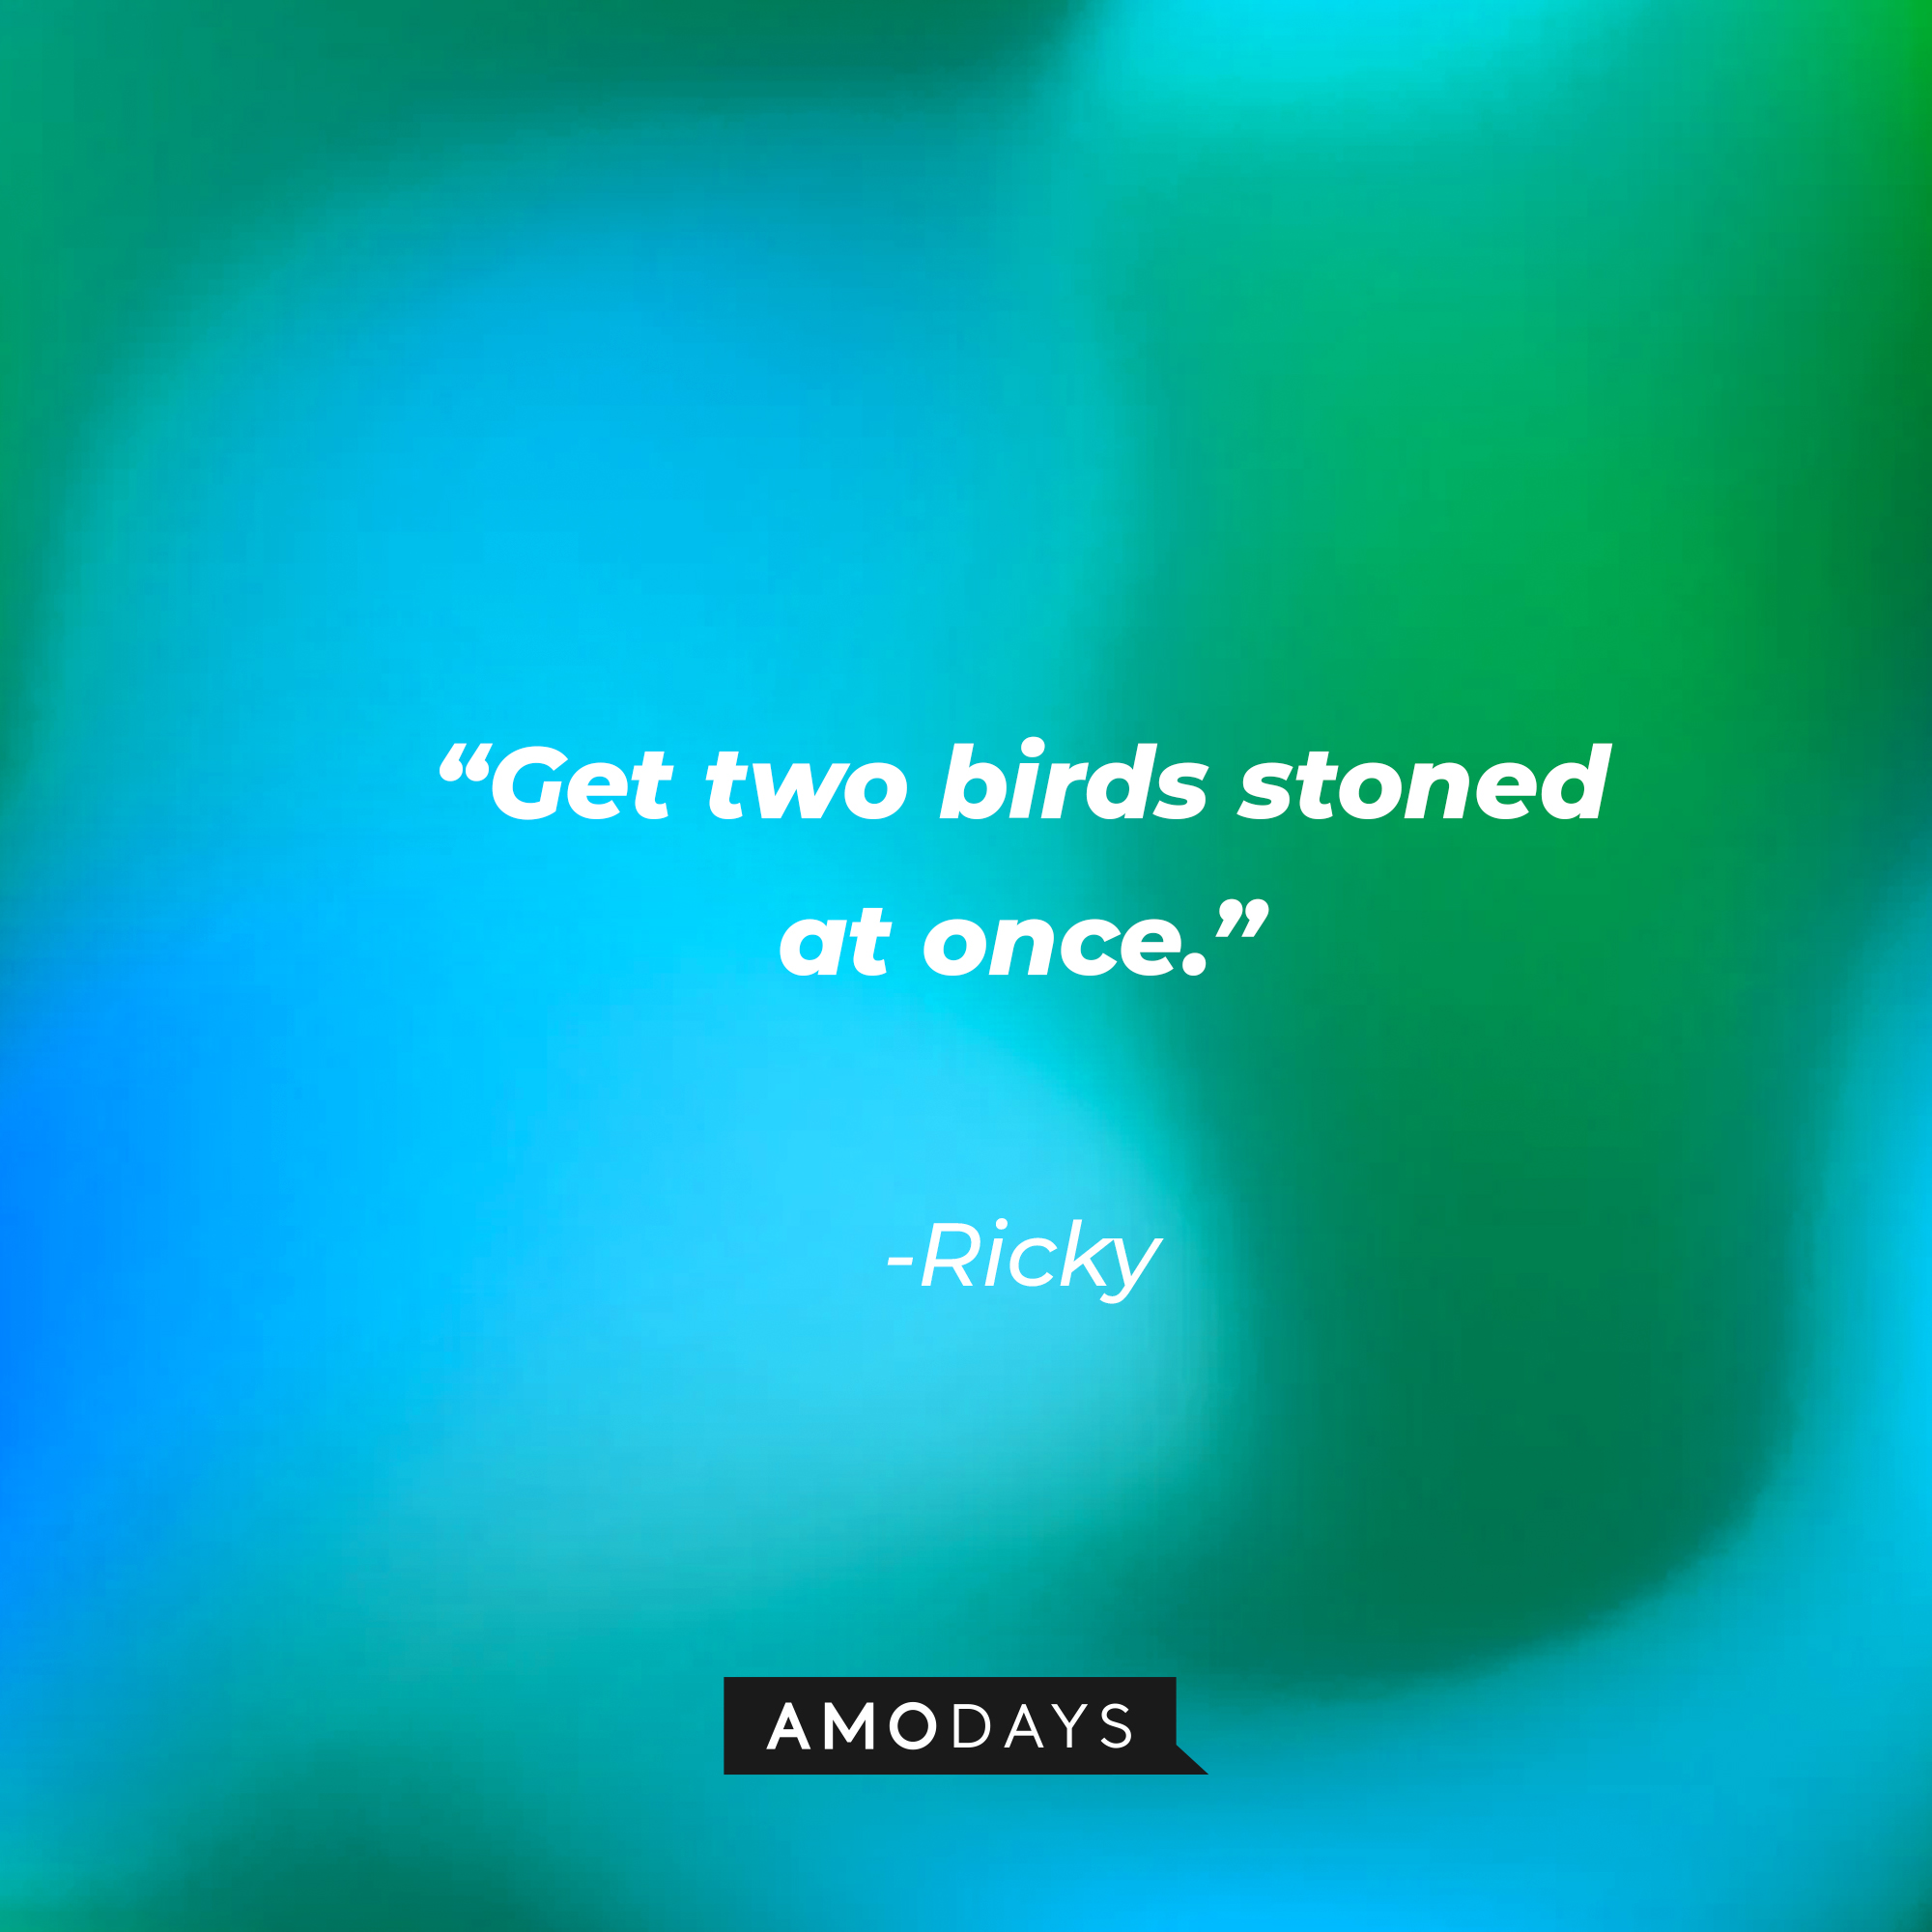 Ricky's quote: “Get two birds stoned at once.” | Source: Amodays